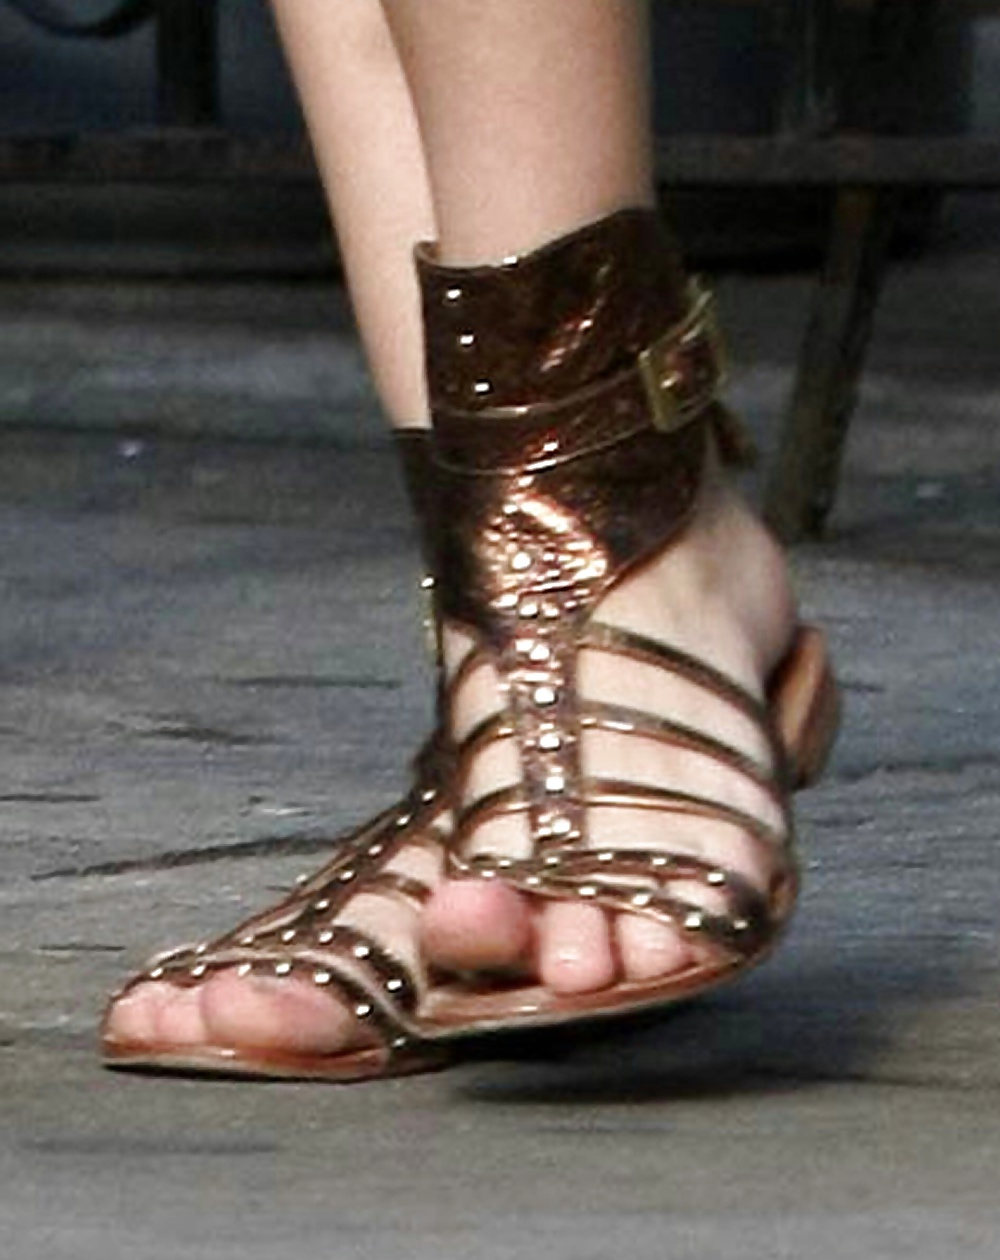 Taylor_Momsen_and_feet (4/44)